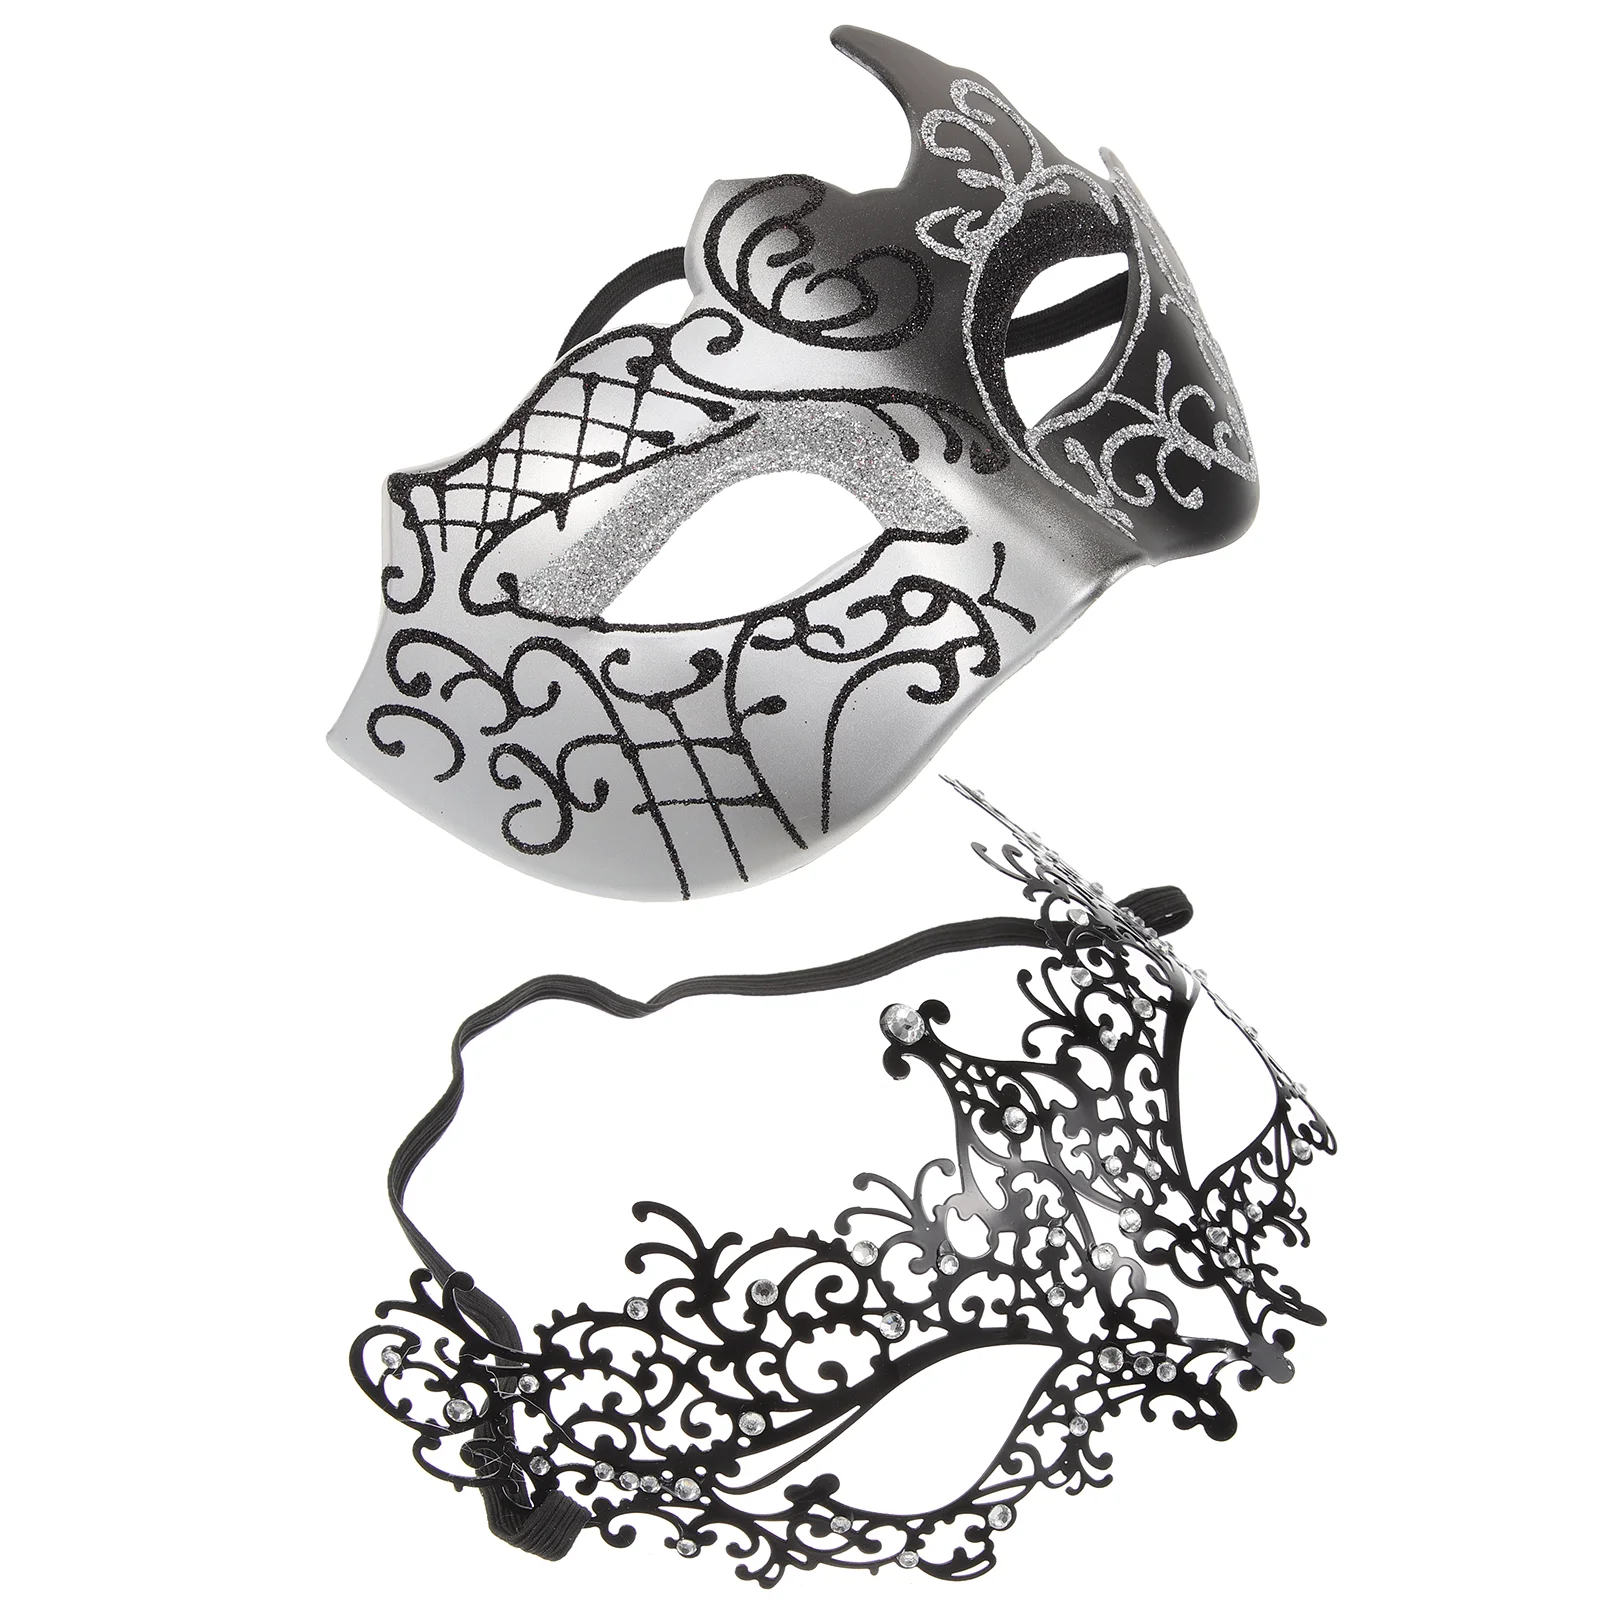 

Couple Mask Set Carnival Masquerade for Cosplay Iron Costume Party Decorative Lovers